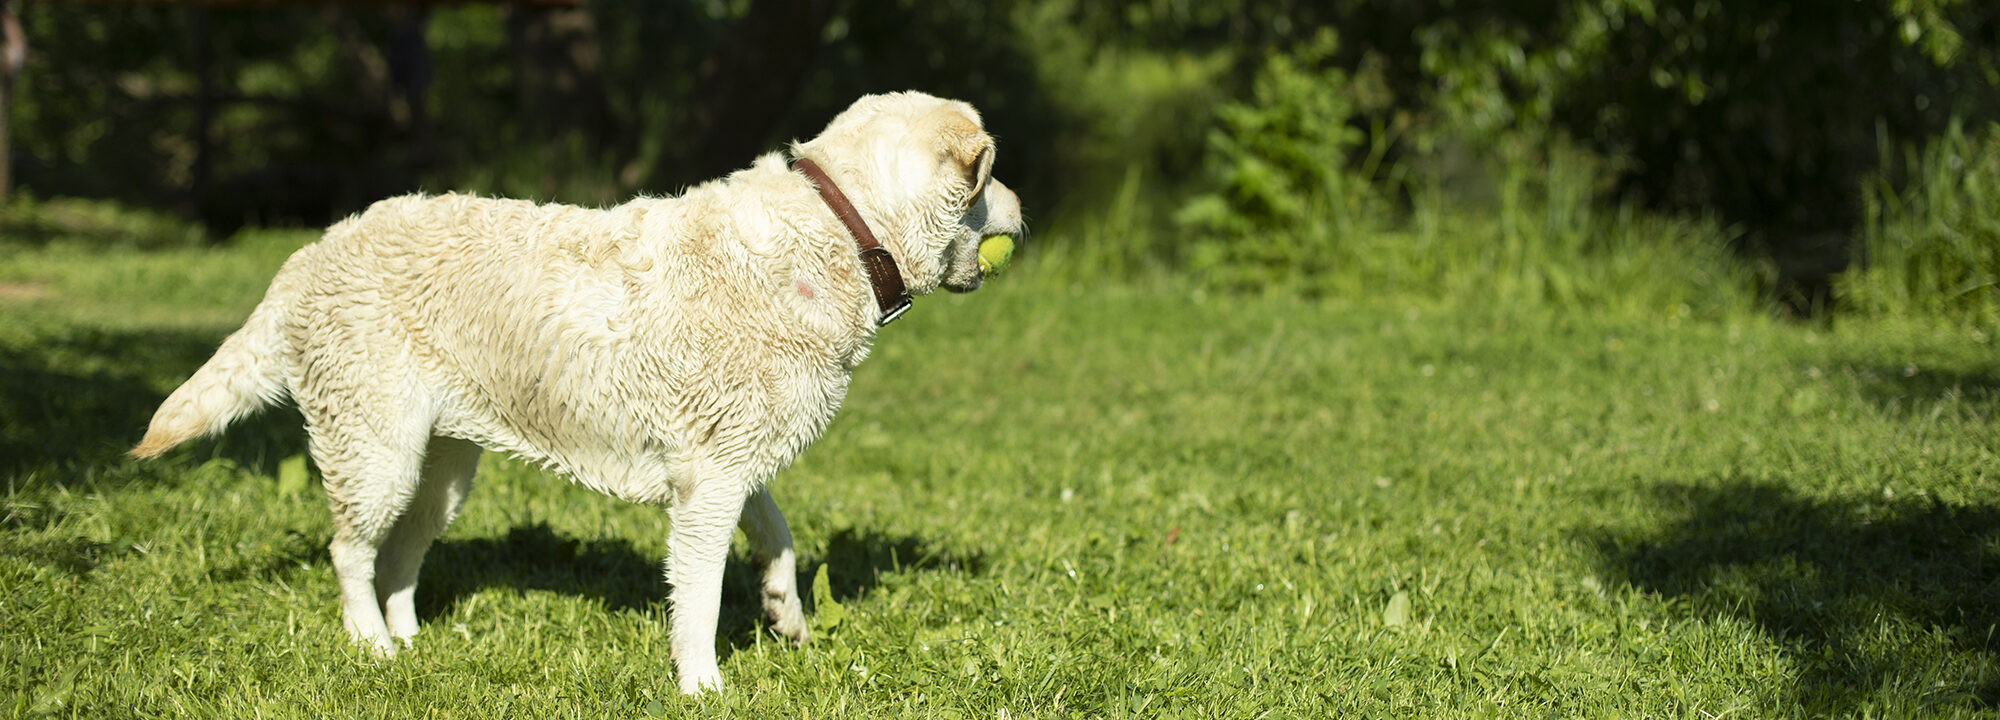 dog with white coat with ball in mouth looking towards to woods